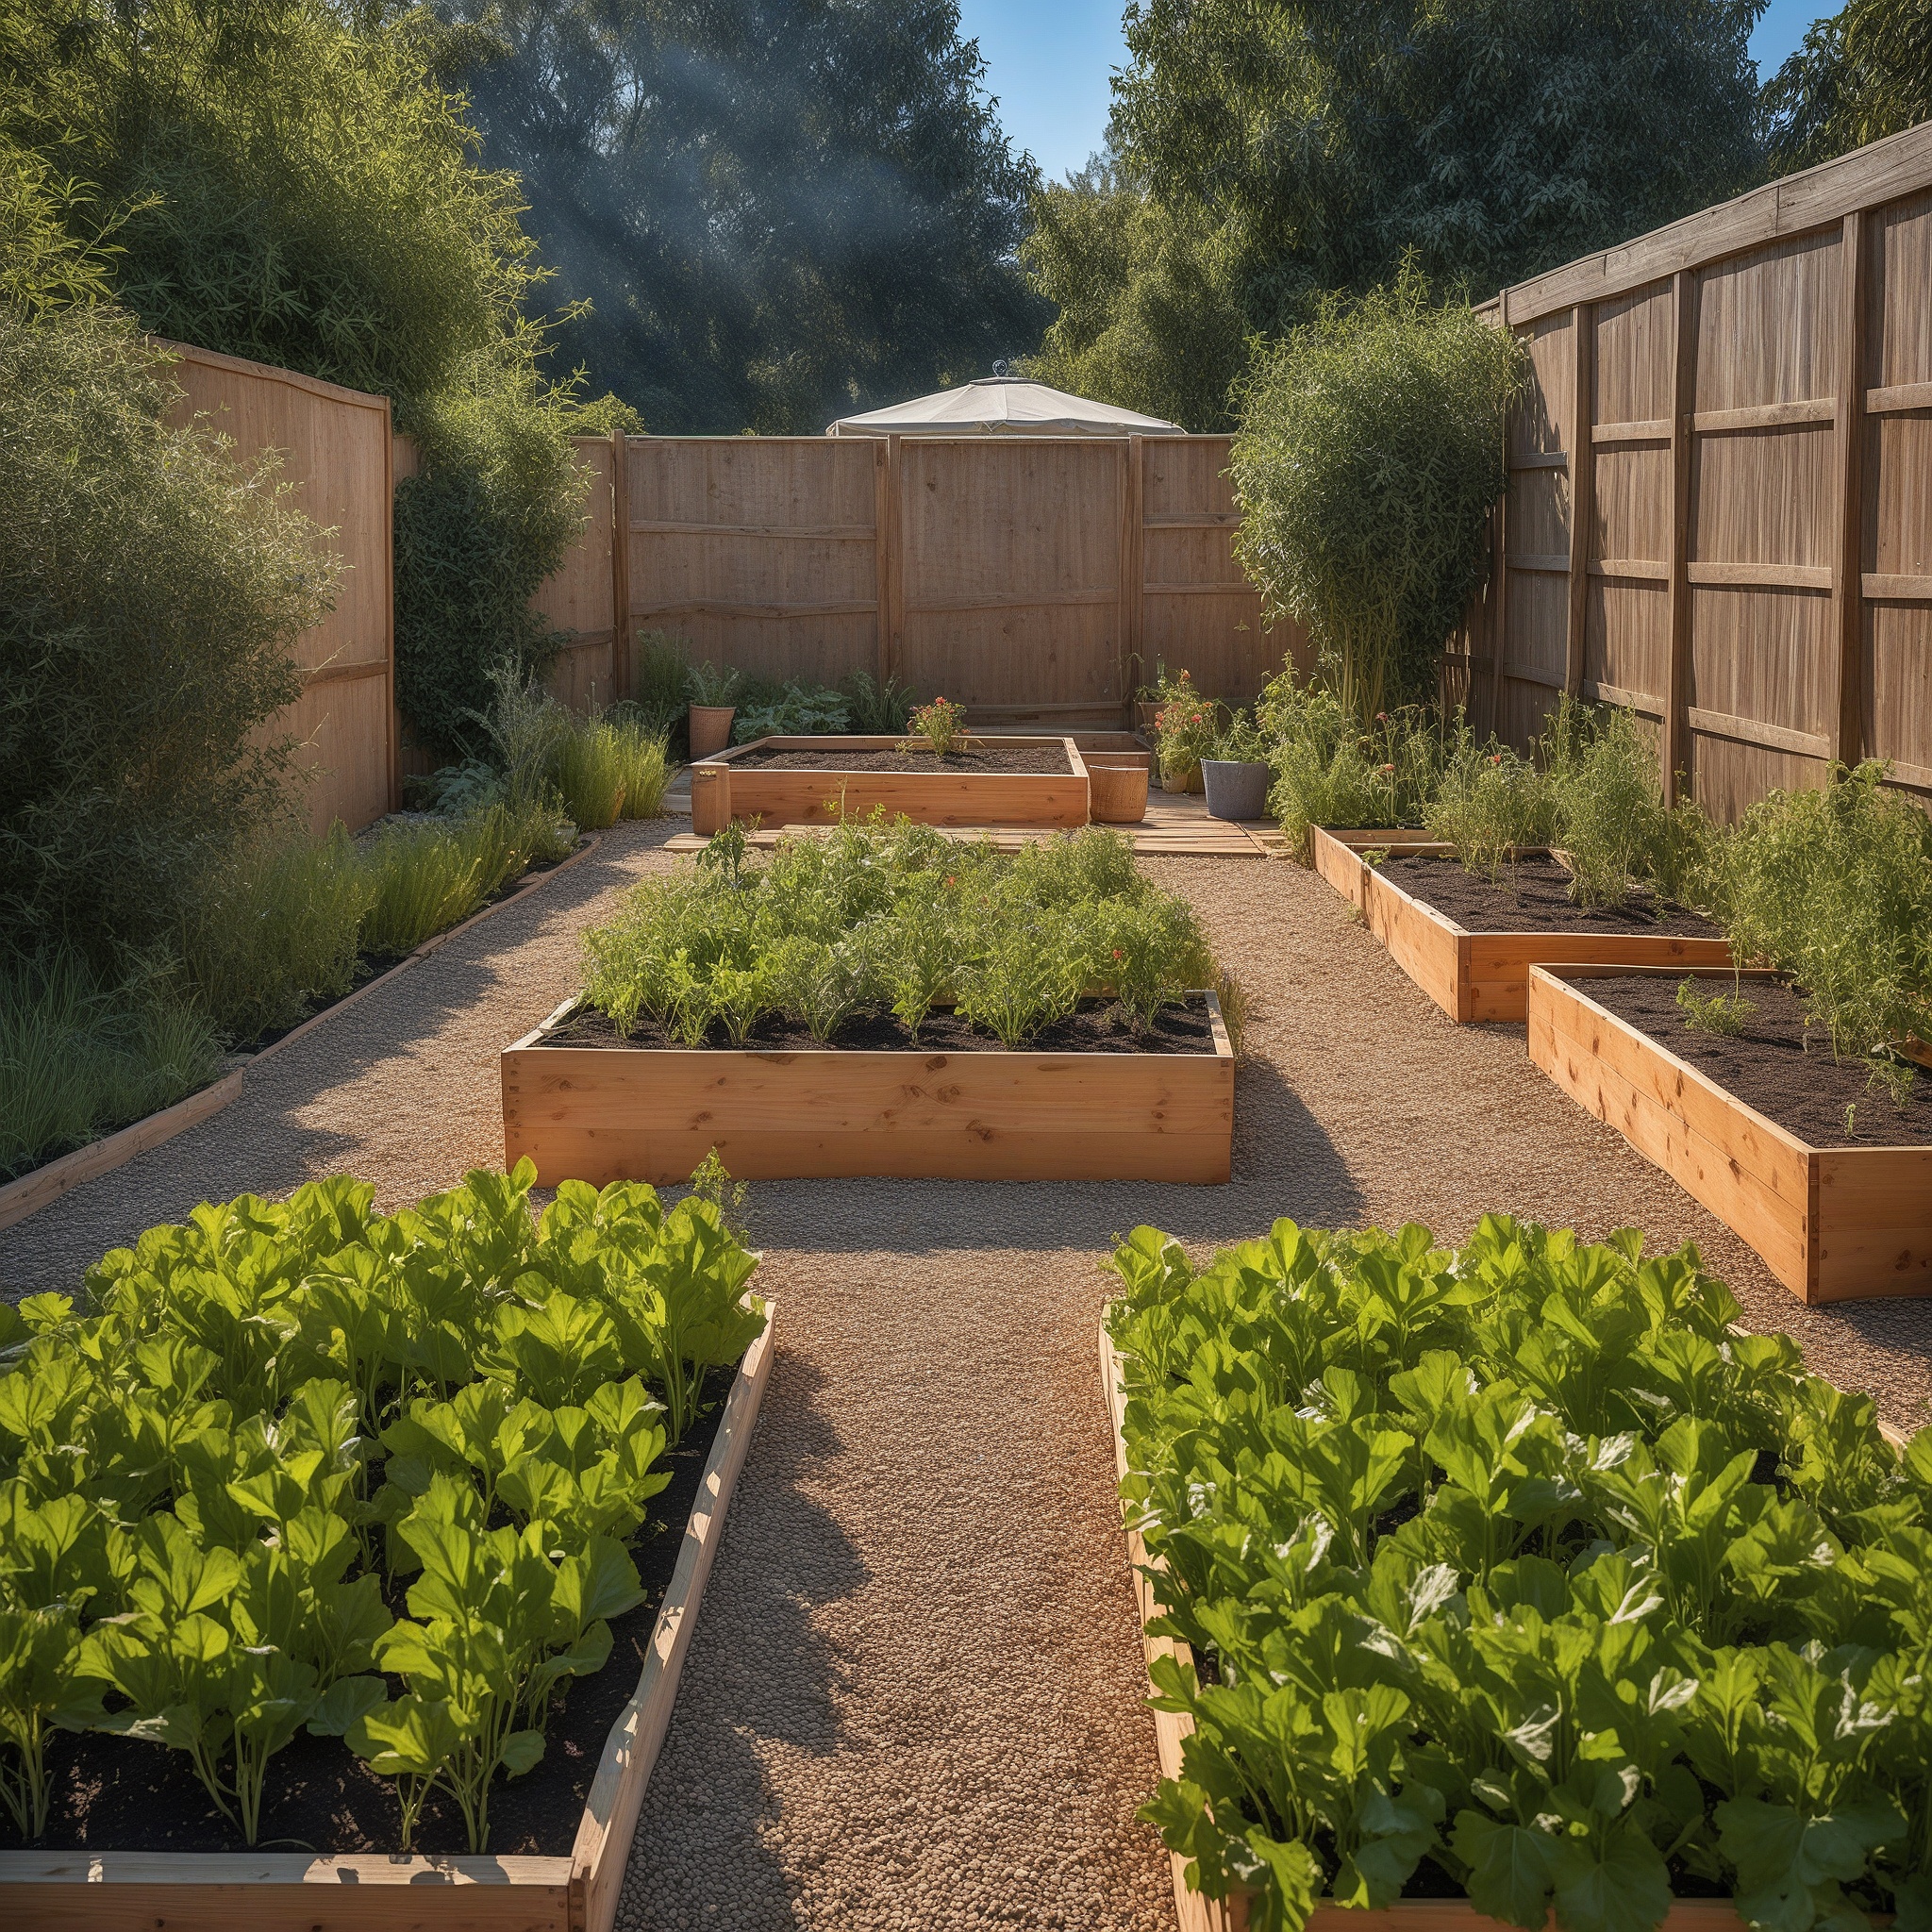 Vegetable Garden with Raised Beds